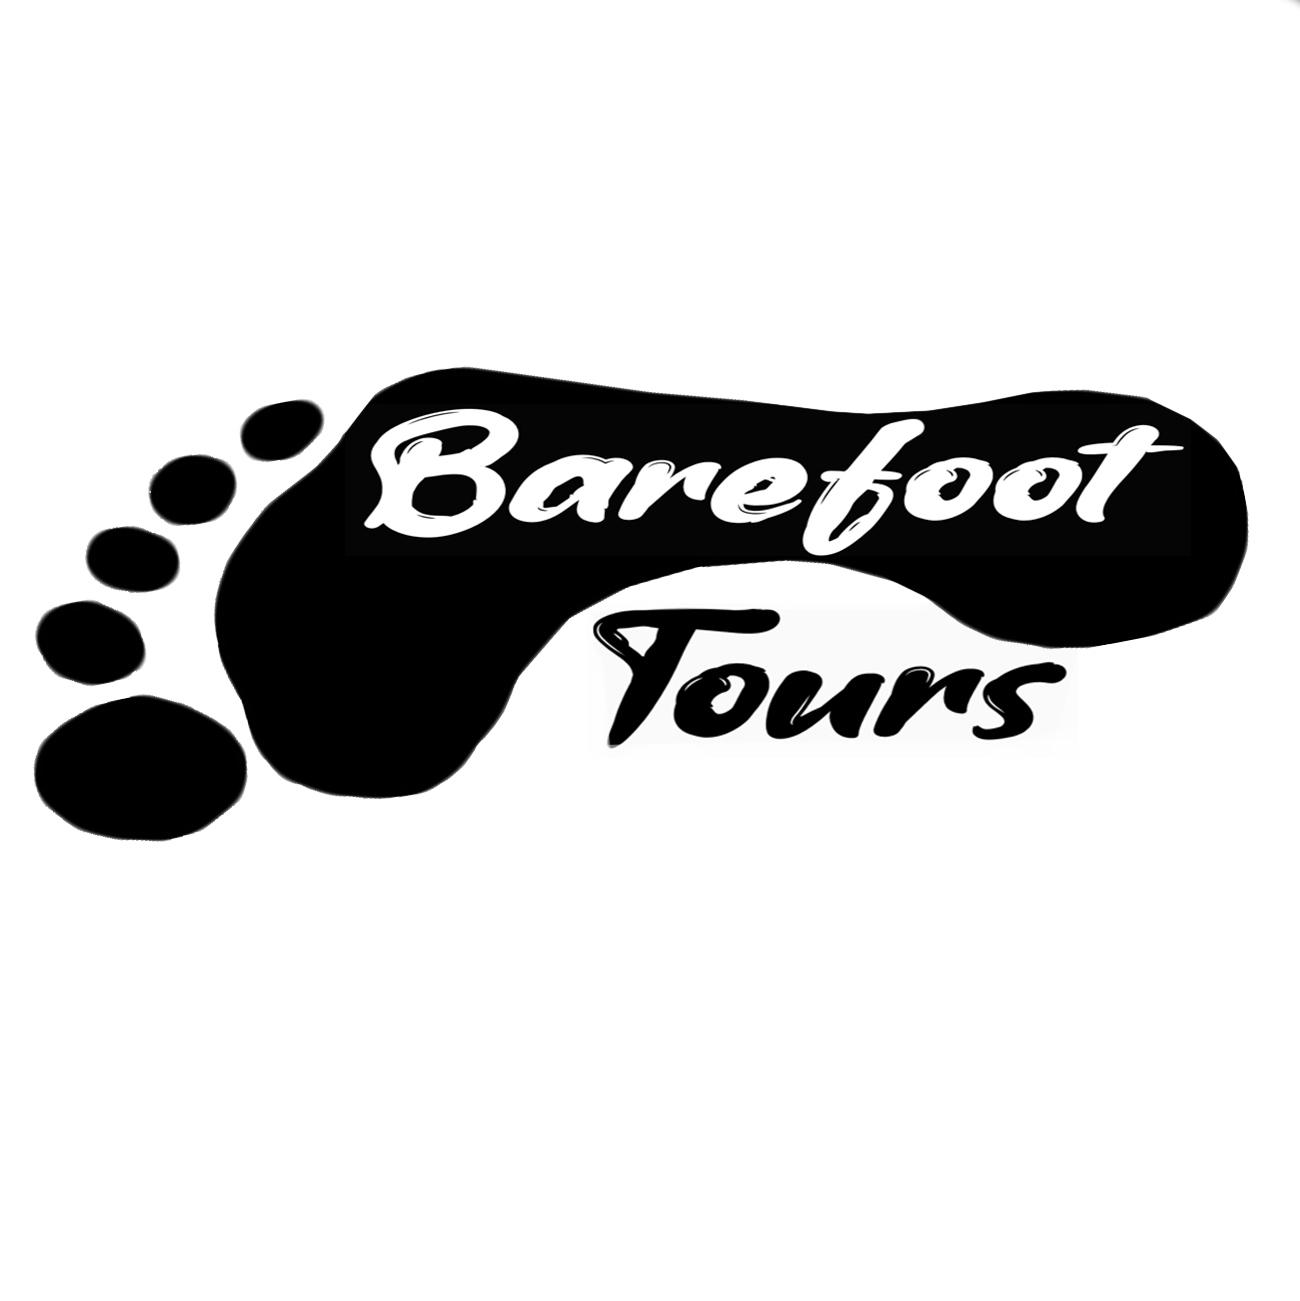 Barefoot Tours | GetYourGuide-Anbieter